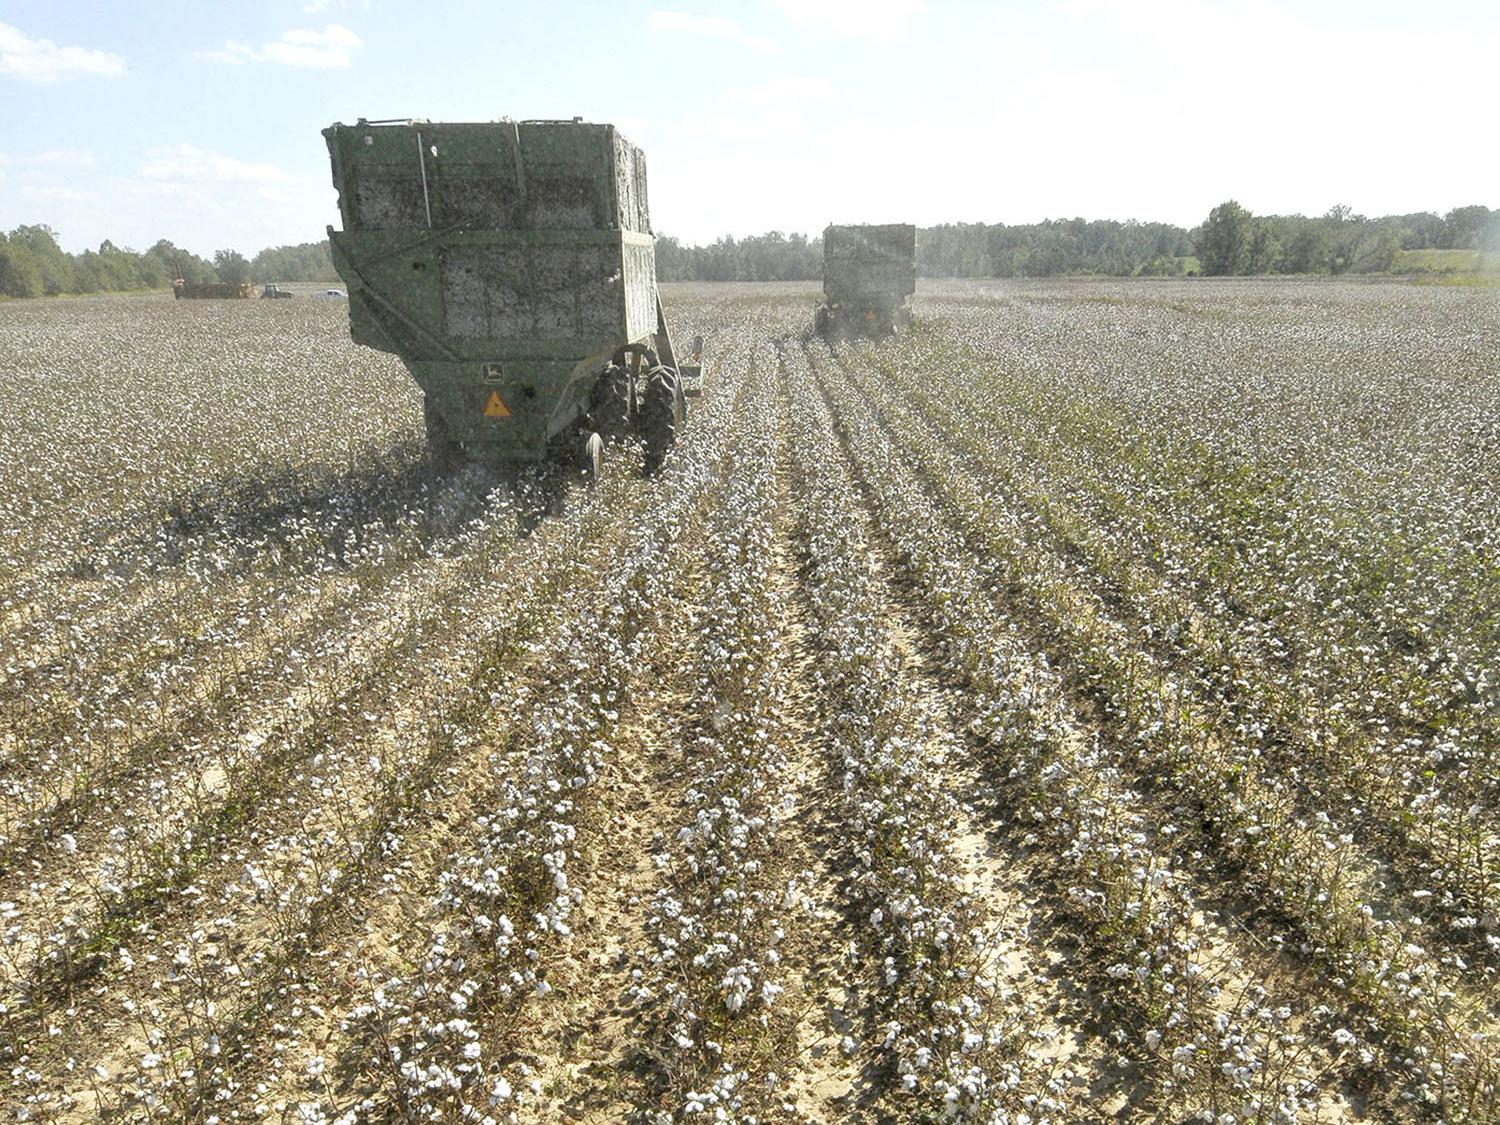 Although rain halted fieldwork for more than a week in early October, Mississippi's cotton harvest is well underway and yields are high. This machine was picking cotton on Topashaw Farms in Calhoun County, Sept. 28, 2011. (File photo by MSU Ag Communications/Scott Corey)